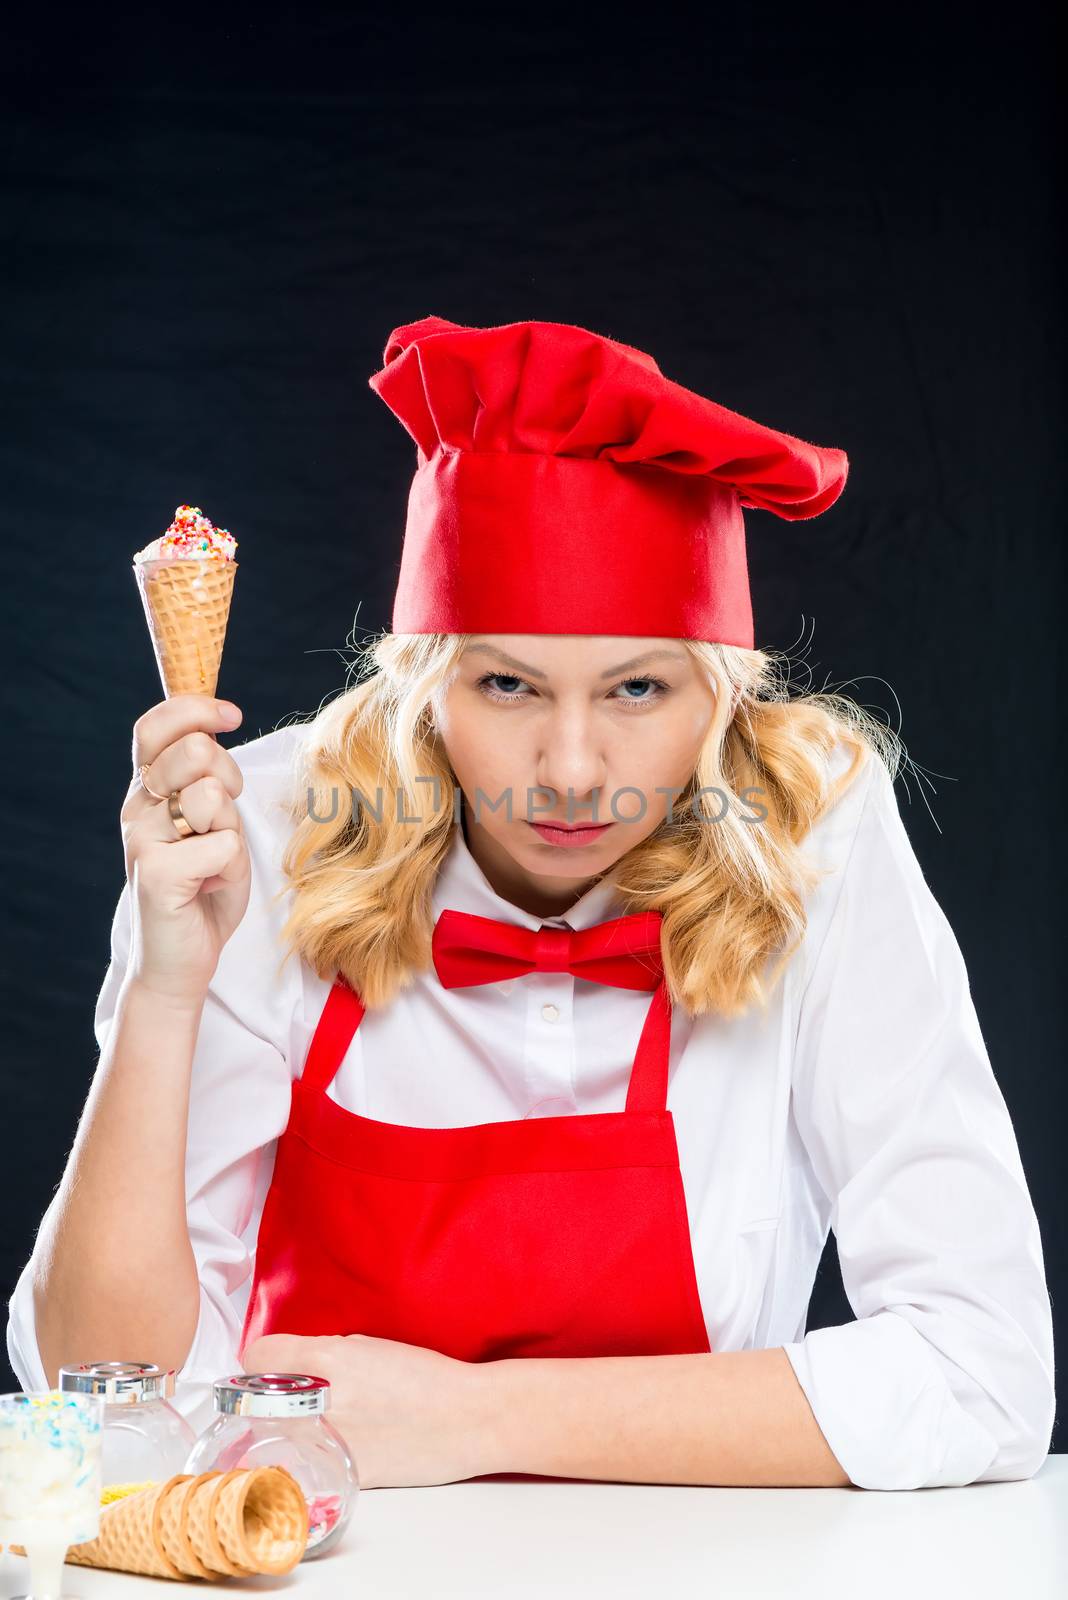 Aggressive cook with ice cream in hand, emotional portrait on black background